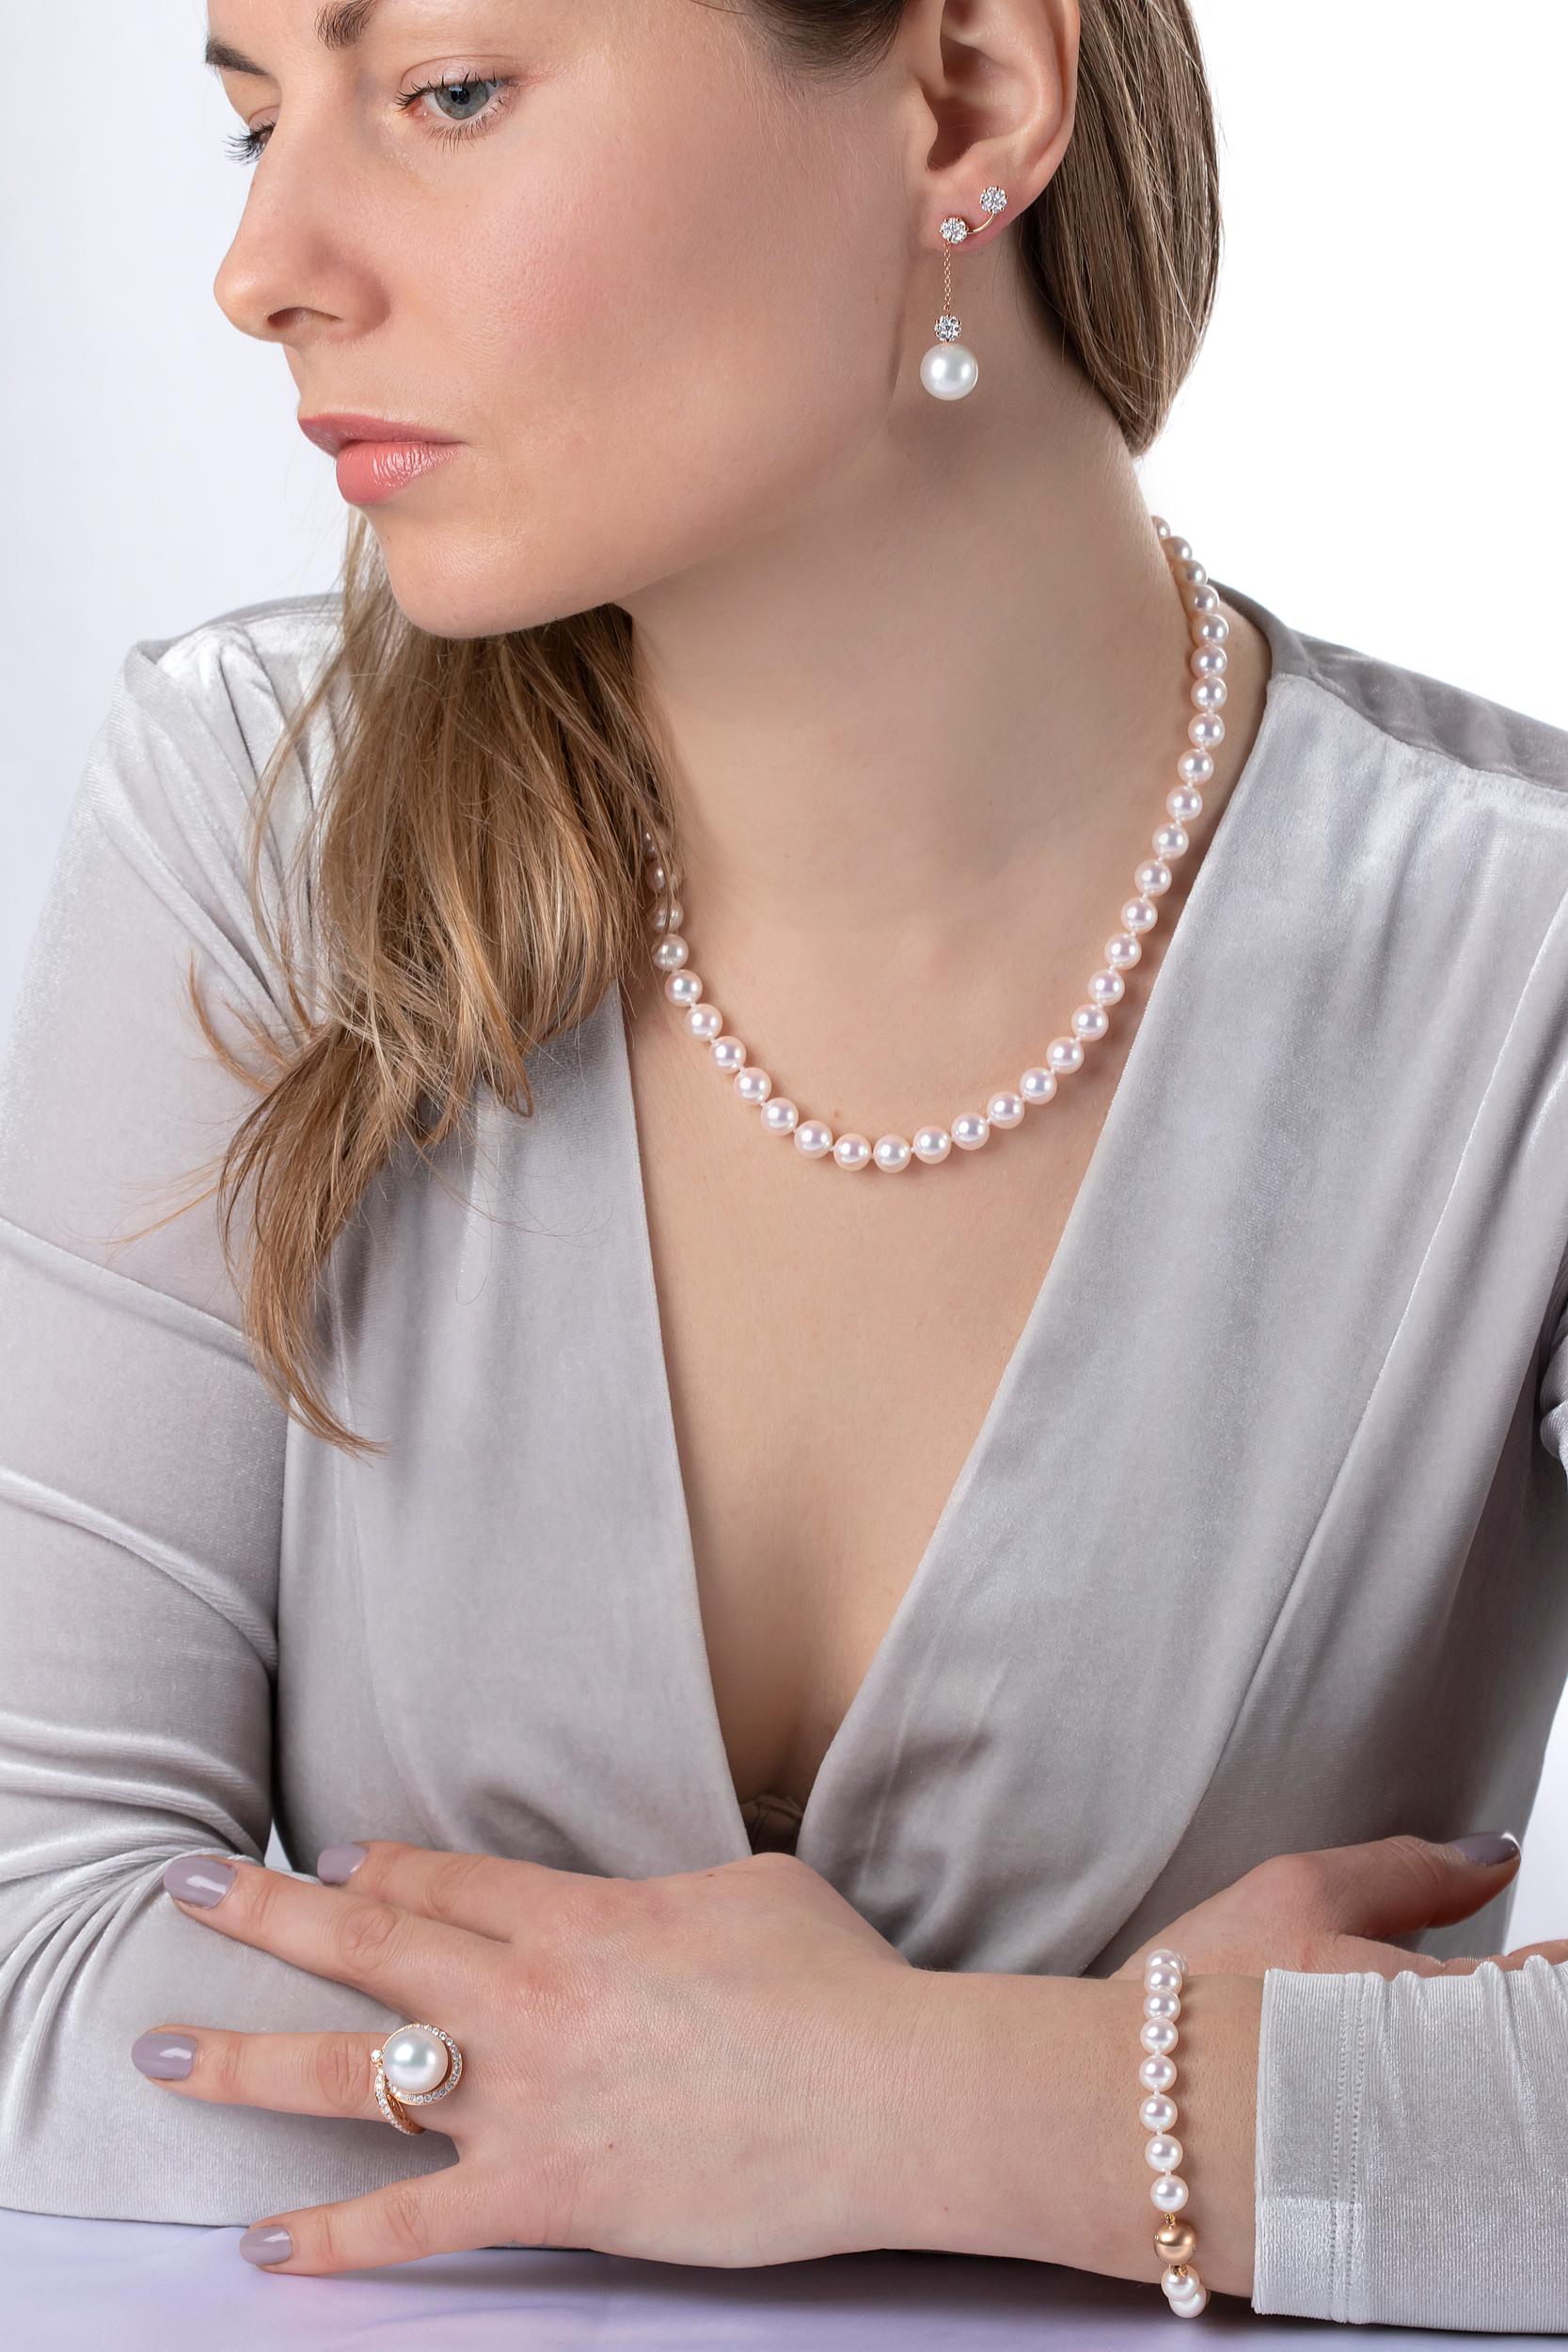 This timeless necklace by Yoko London features premium 7-7.5mm Japanese Akoya pearls with a subtle rose over-tone, finished with a diamond-set 18K rose gold clasp. Crafted in our London atelier by the world’s leading pearl specialists, this classic